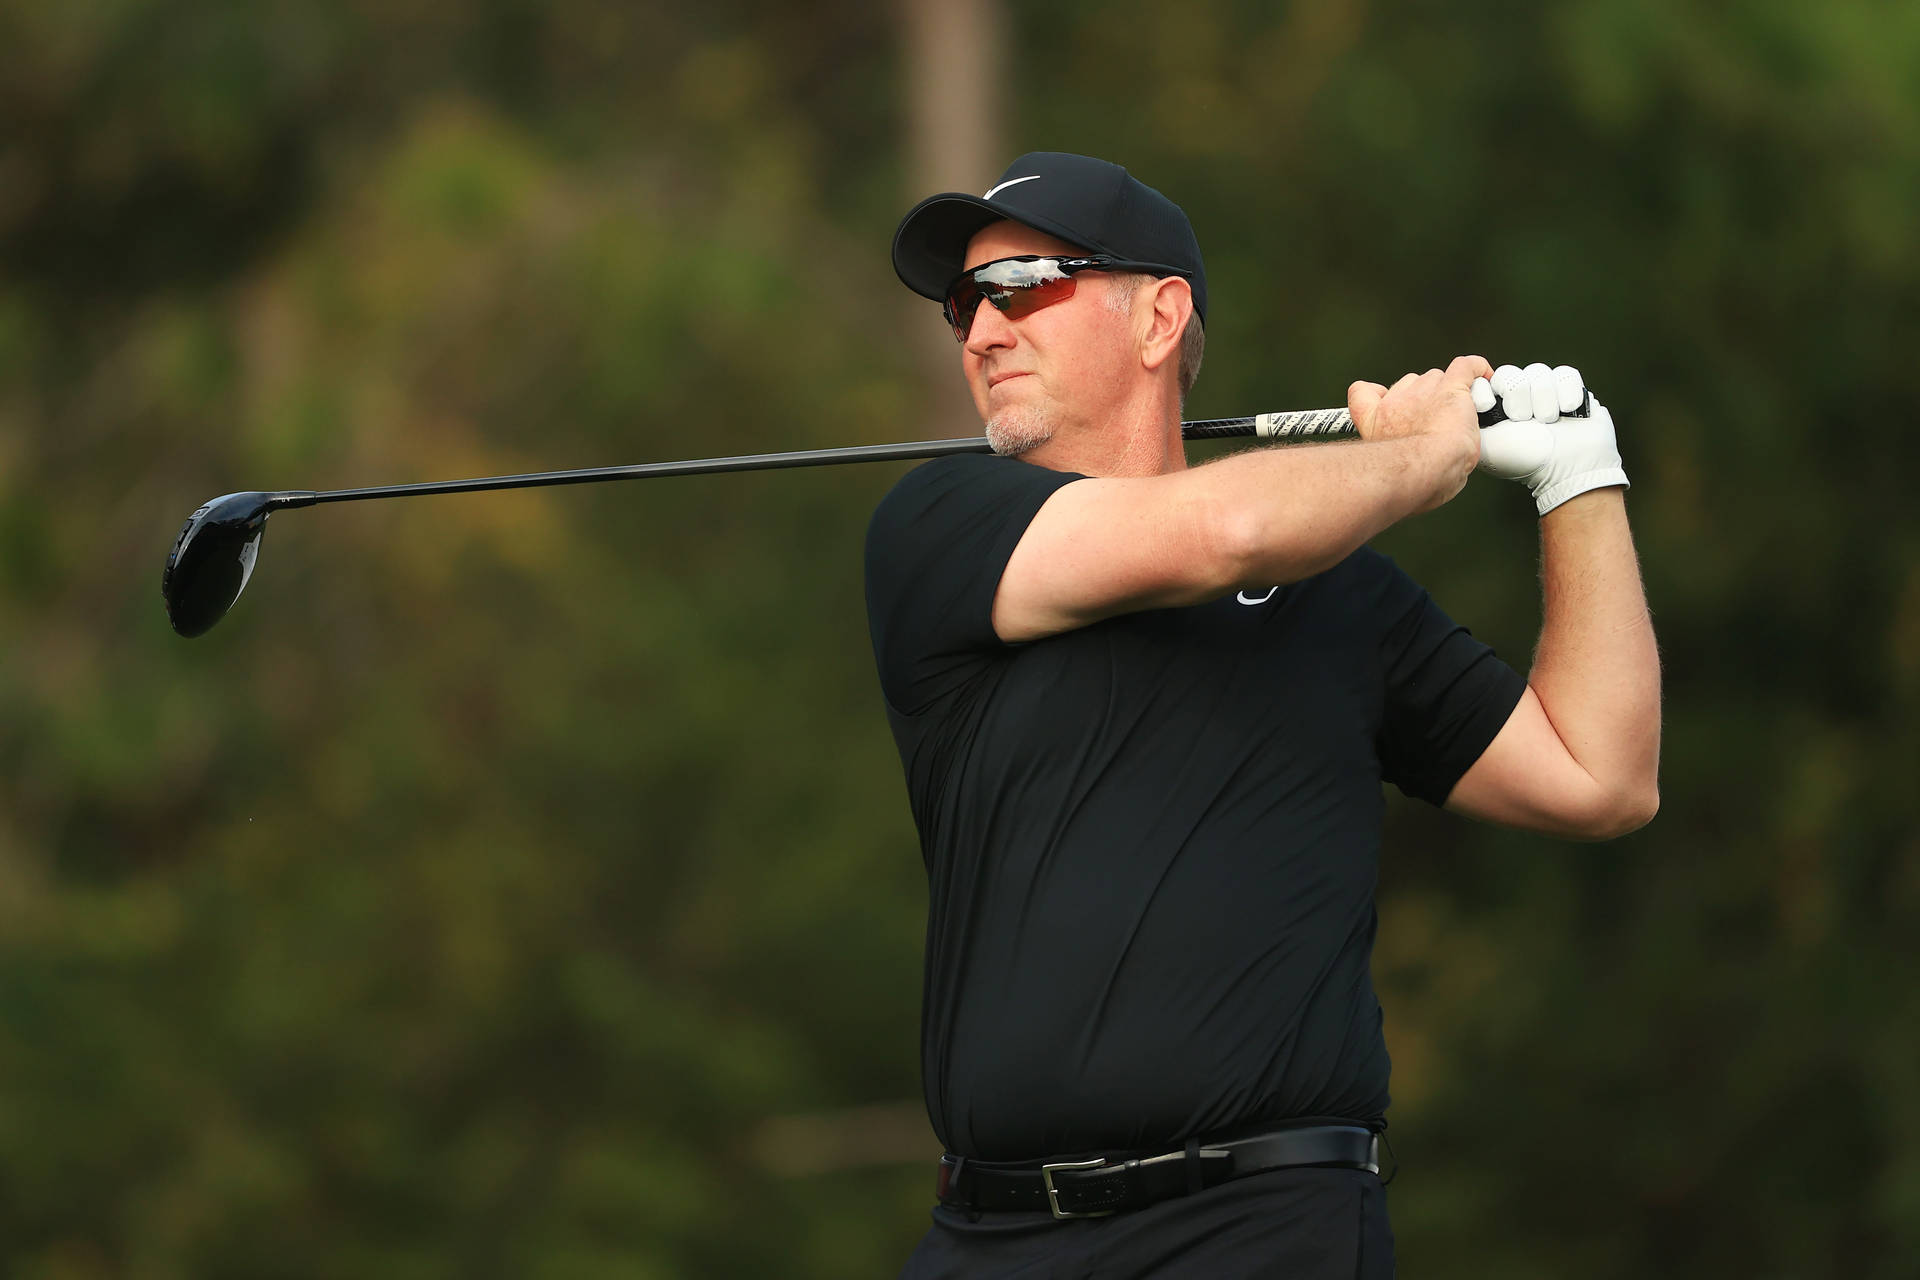 David Duval All-Black Outfit Wallpaper